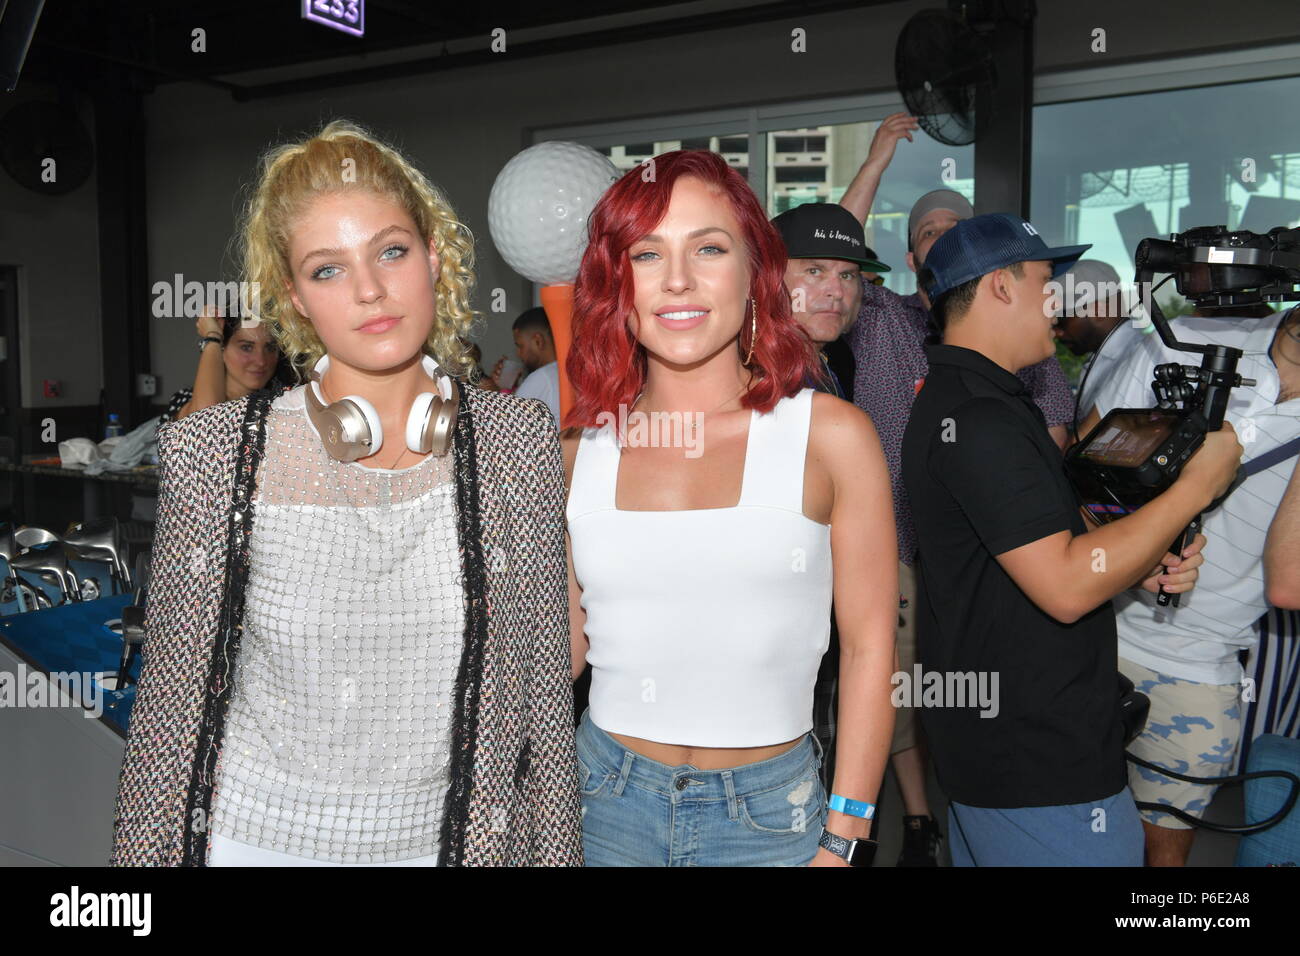 Miami Gardens, FL, USA. 30th June, 2018. Lindsay Arnold, Sharna May Burgess at the Topgolf during Dj Irie Weekend 2018 on June 30, 2018 in Miami, Florida People: Lindsay Arnold, Sharna May Burgess   Credit: Hoo Me.Com/Media Punch/Alamy Live News Stock Photo